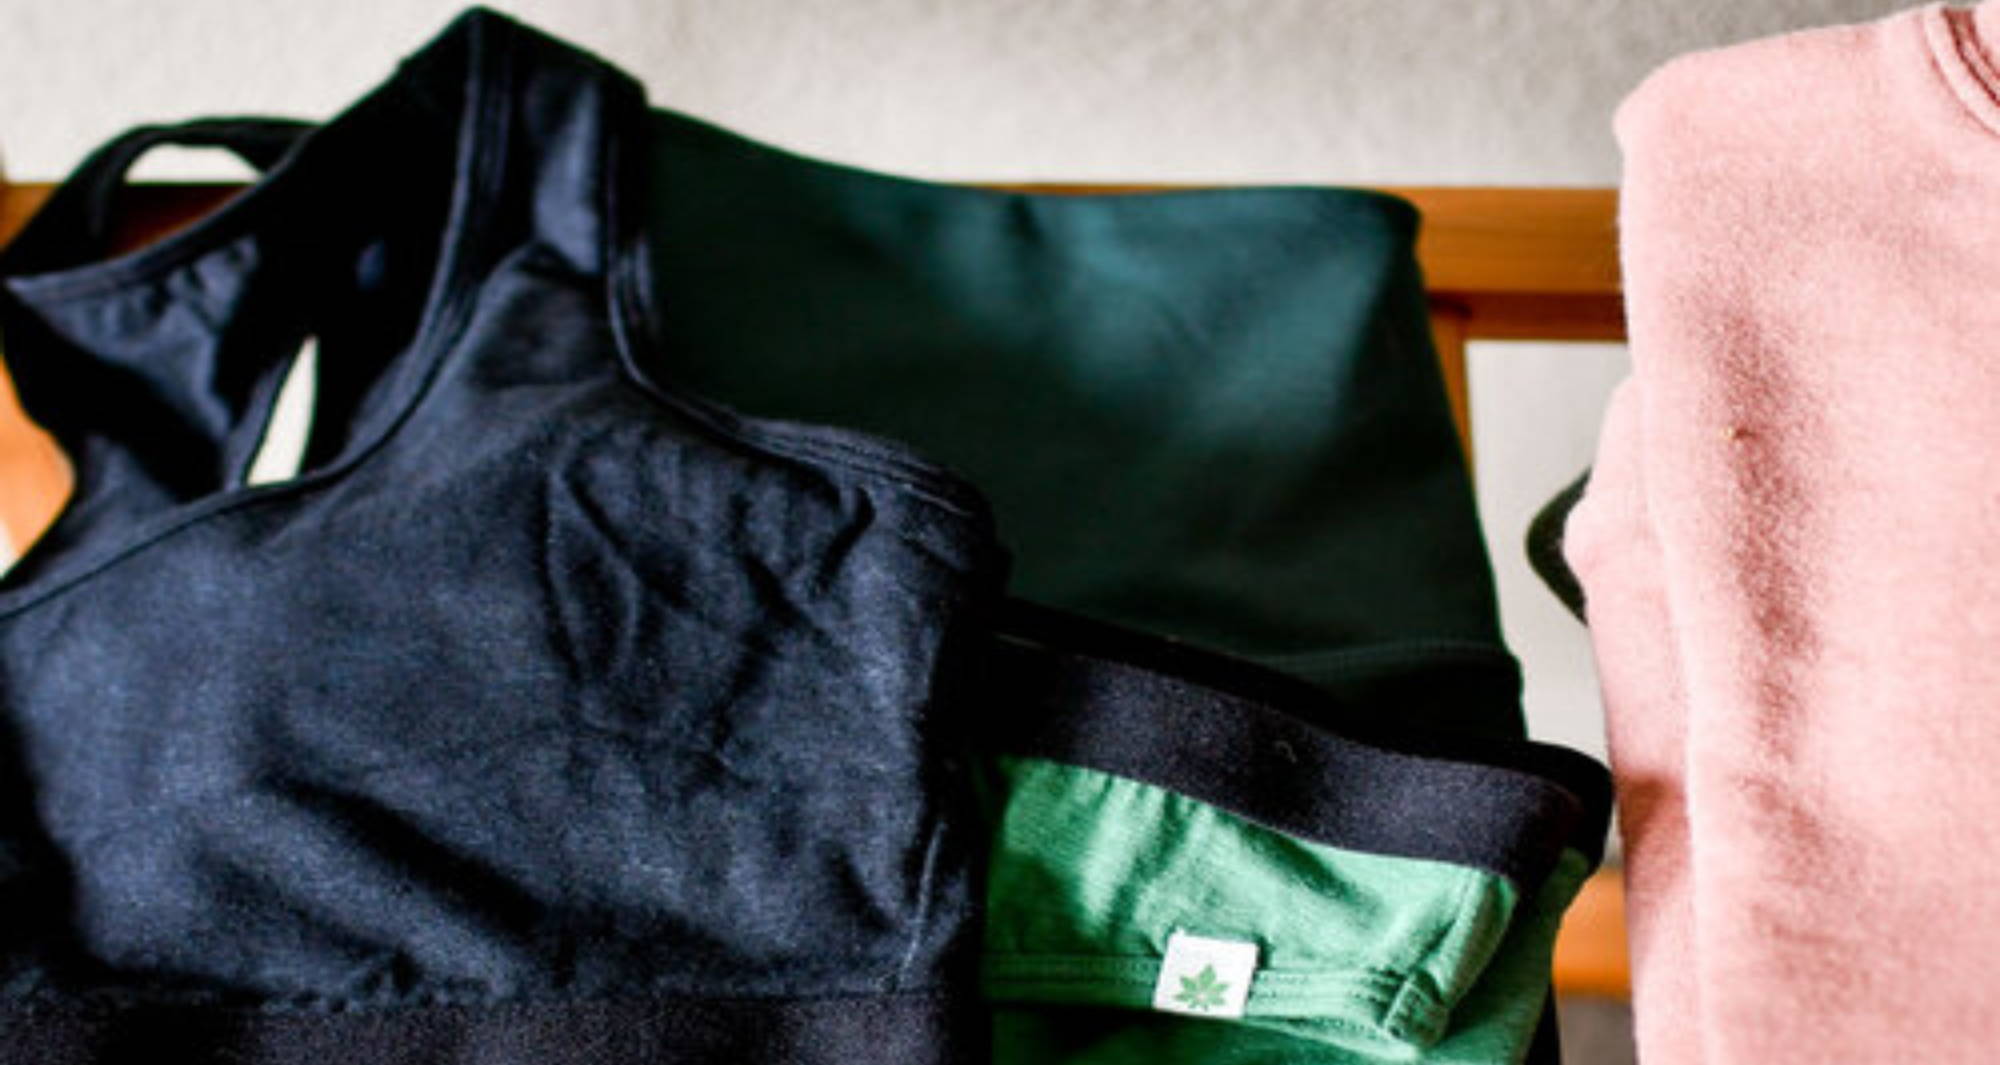 black bralette and green underwear folded on clothing bench